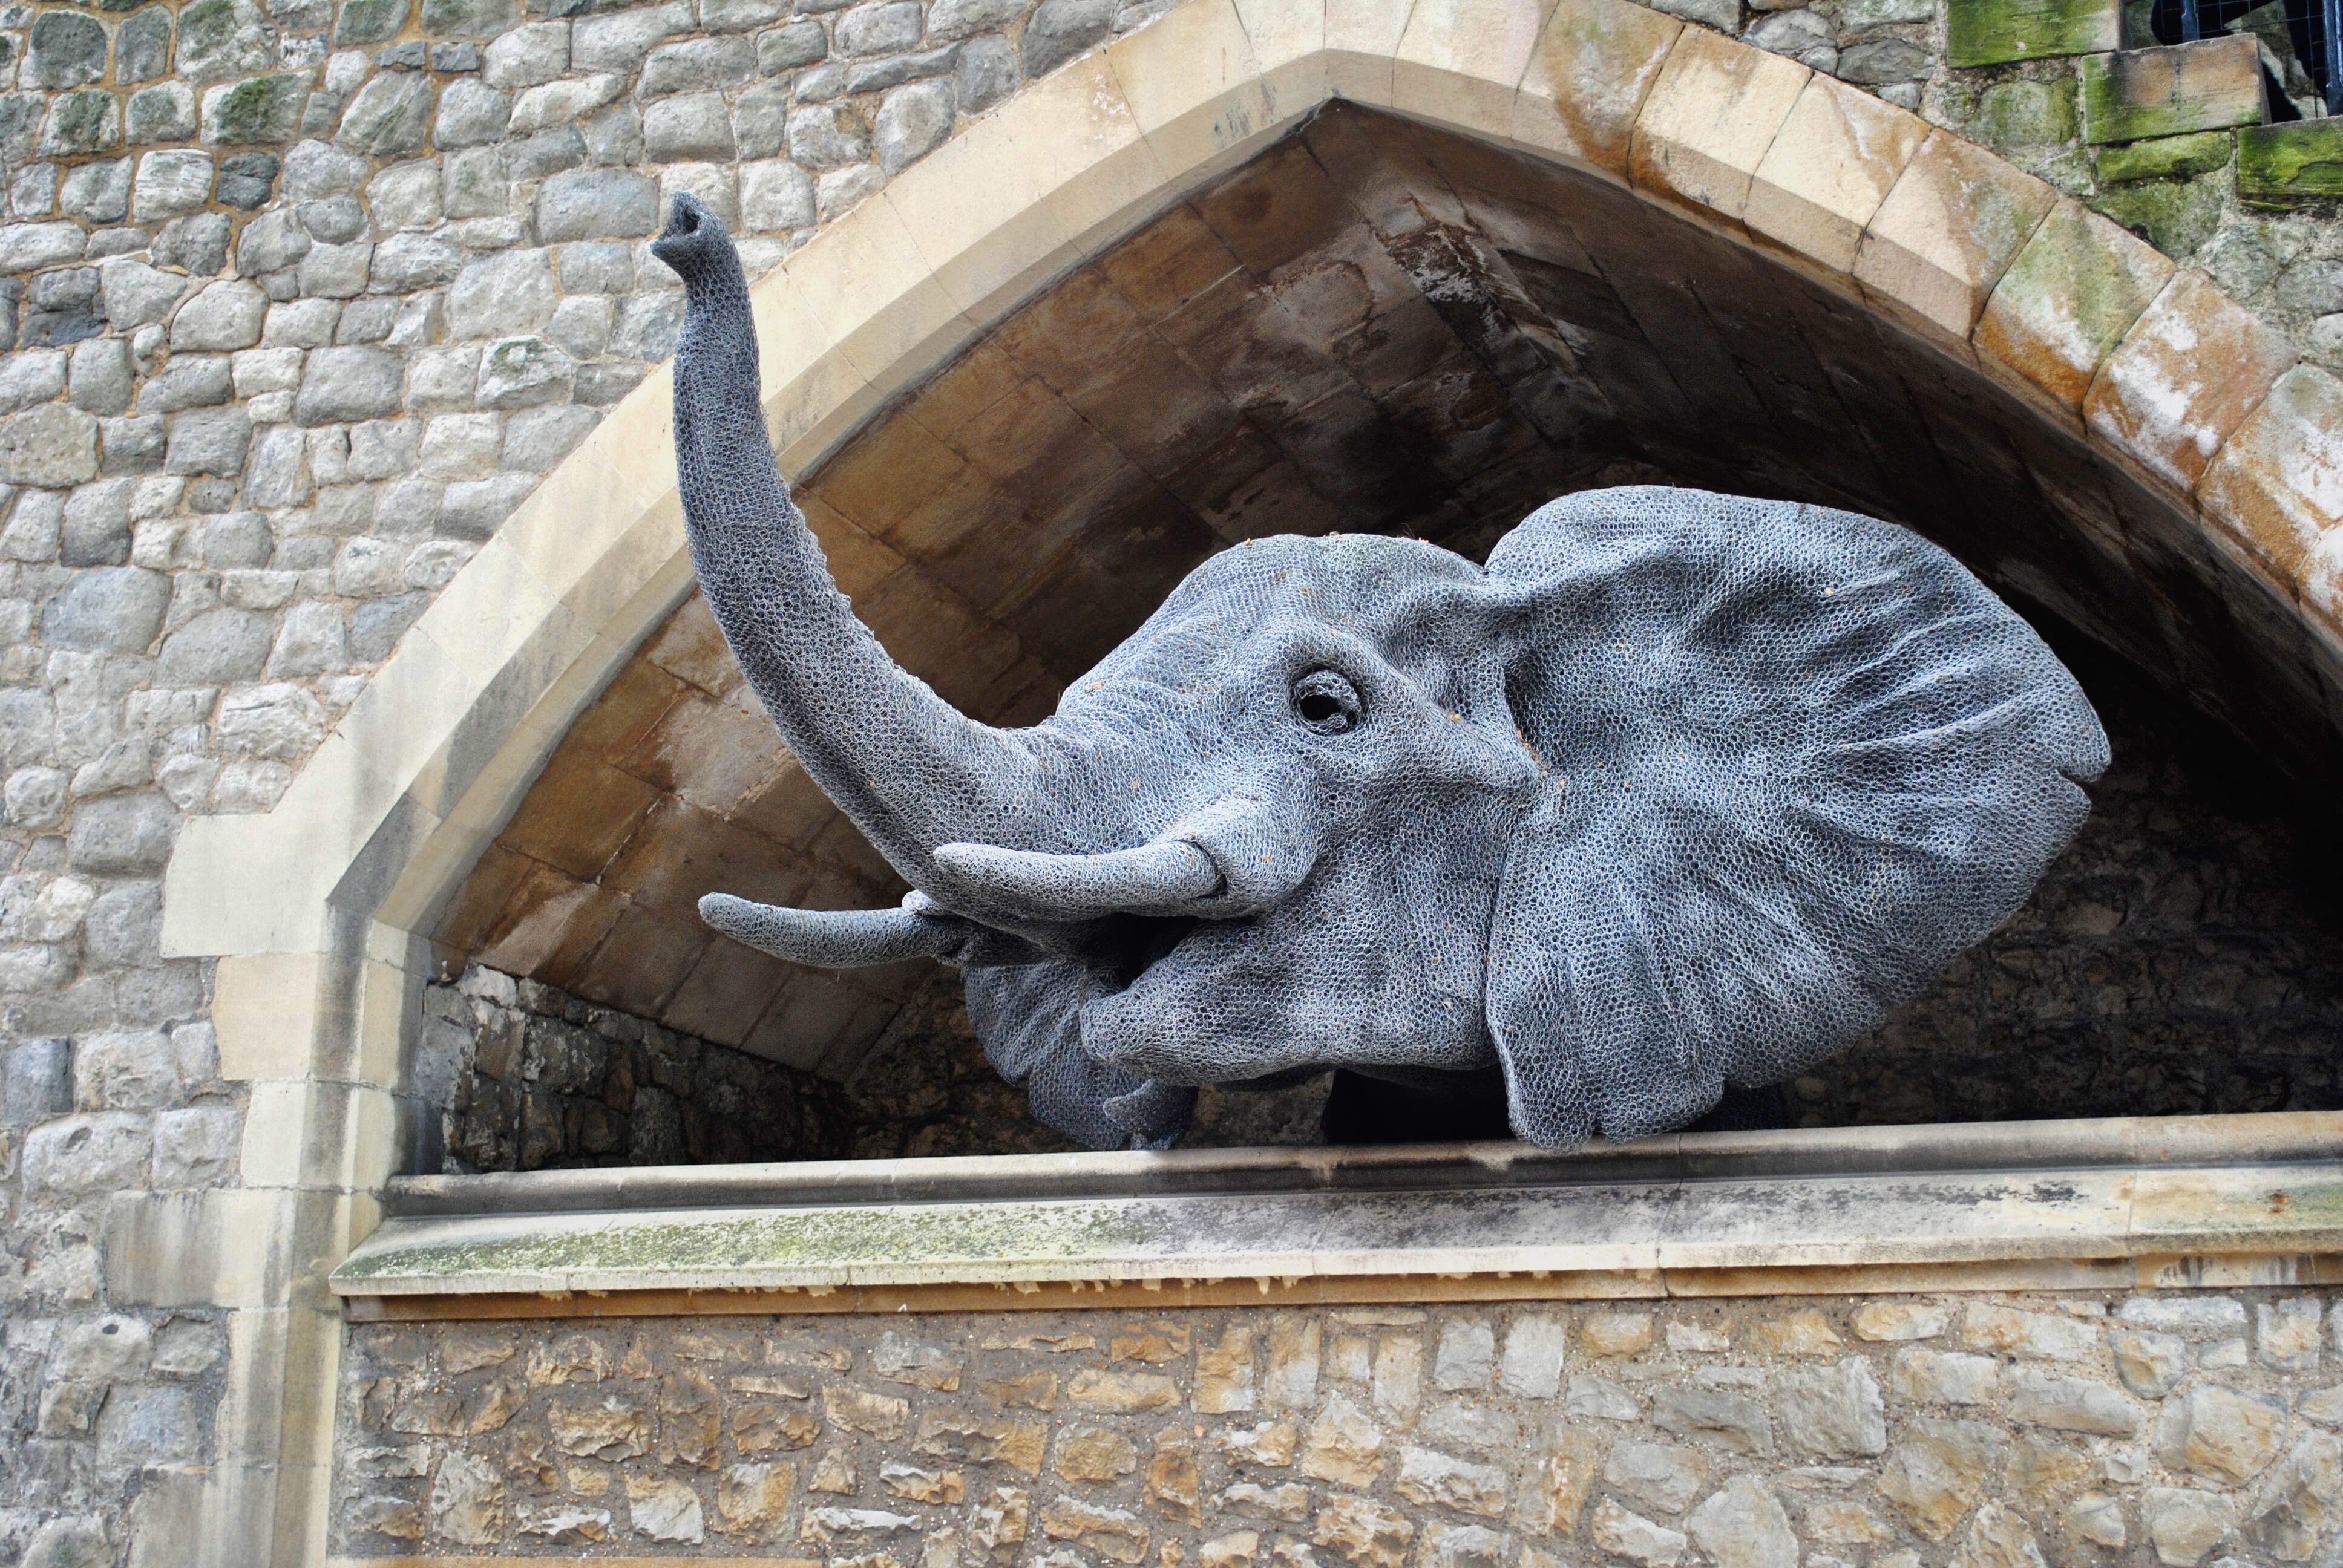 Elephant Sculpture at the Tower of London